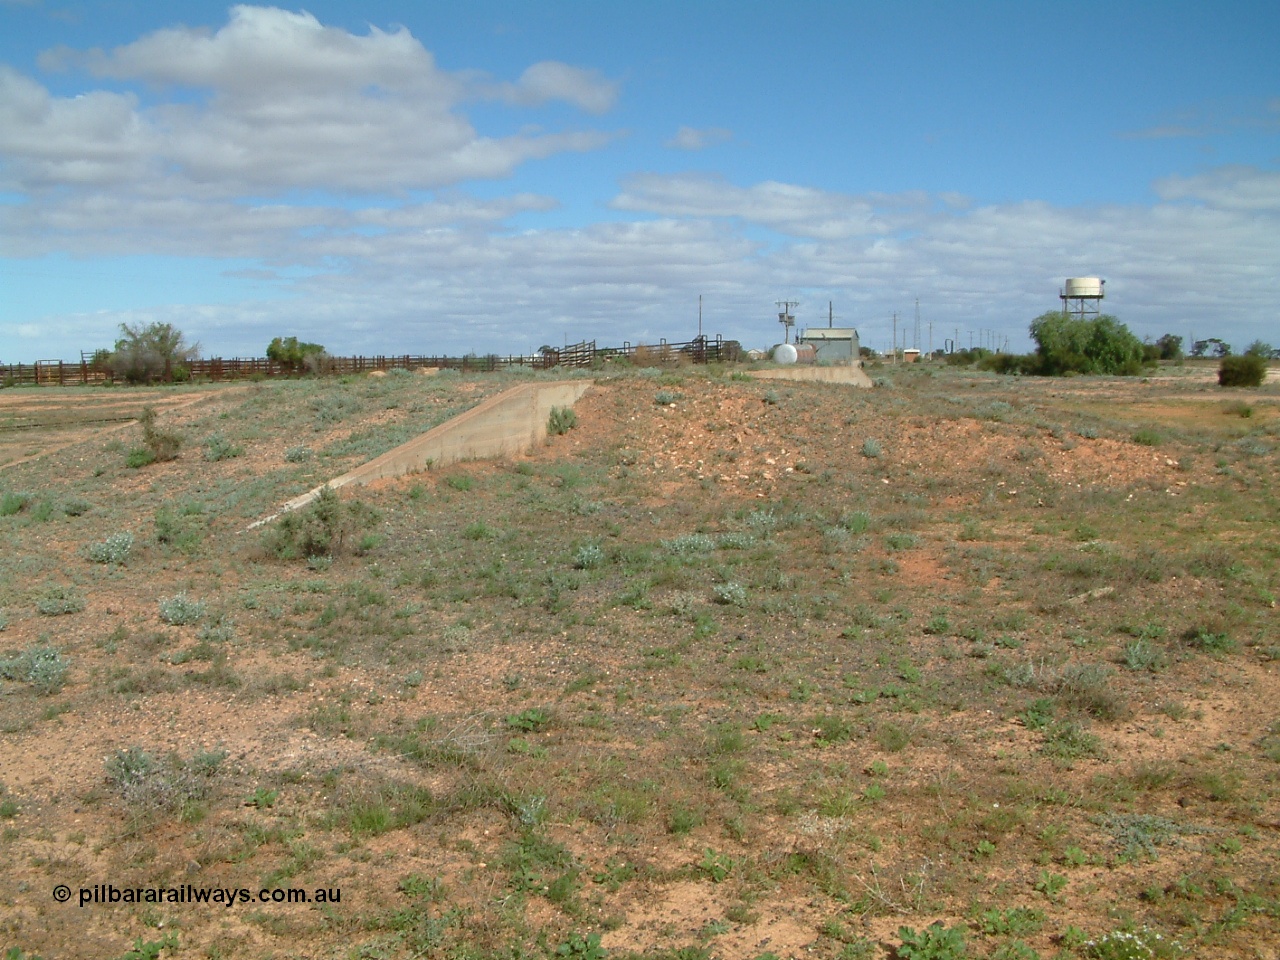 030415 141326
Kingoonya, located at the 426.5 km on the Trans Australian Railway, looking south with loading ramp, cattle yards and loading race, power station, standpipe and tanks stand. [url=https://goo.gl/maps/Tr6FpBMGRyvmQPcXA]GeoData location[/url].
